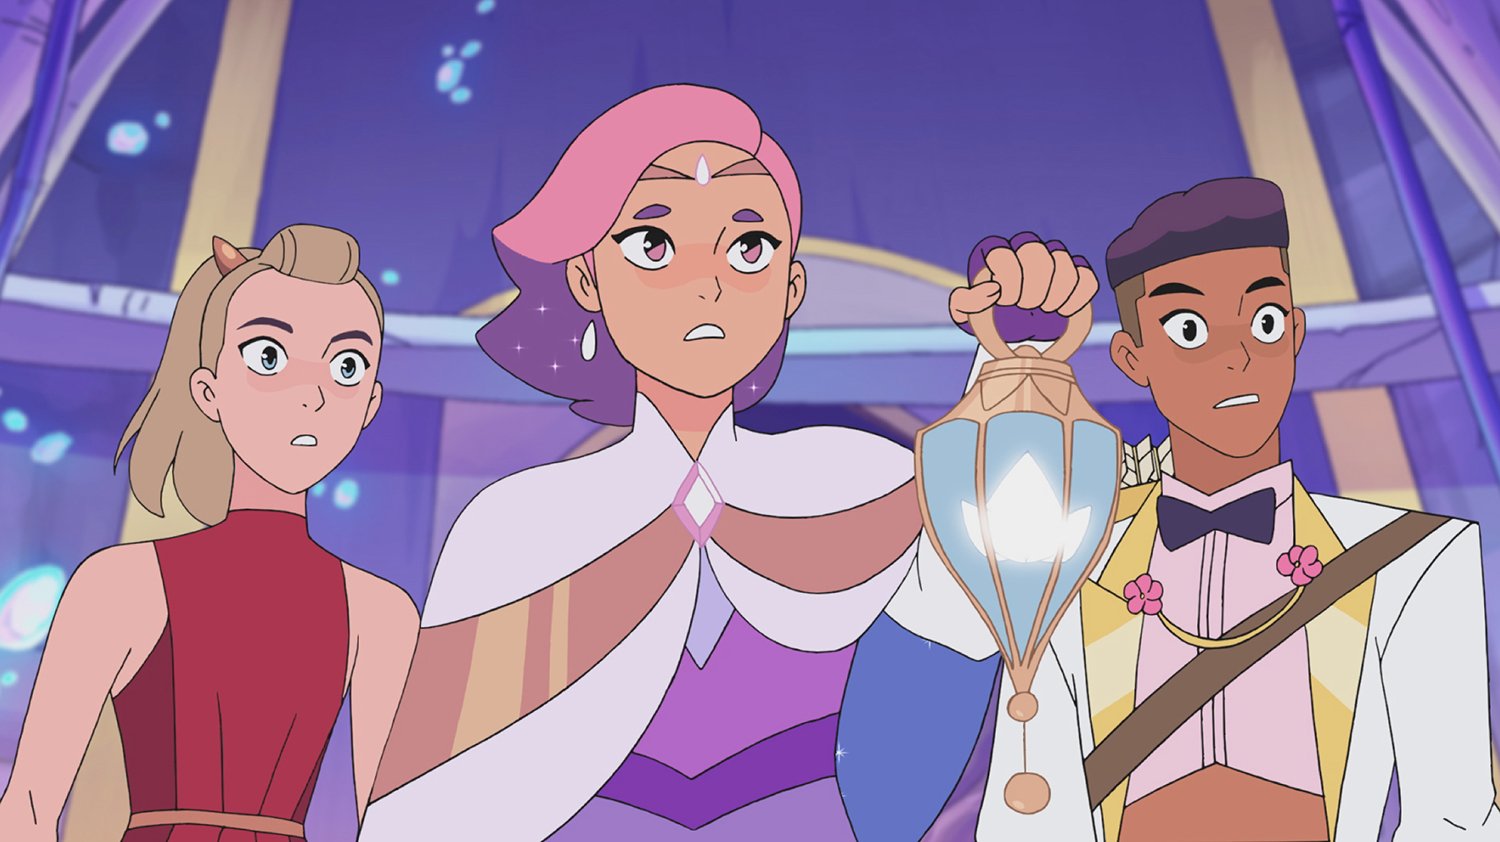 Adora, Glimmer, and Bow during Glimmer's coronation in Season 4, 'She-Ra and the Princesses of Power'